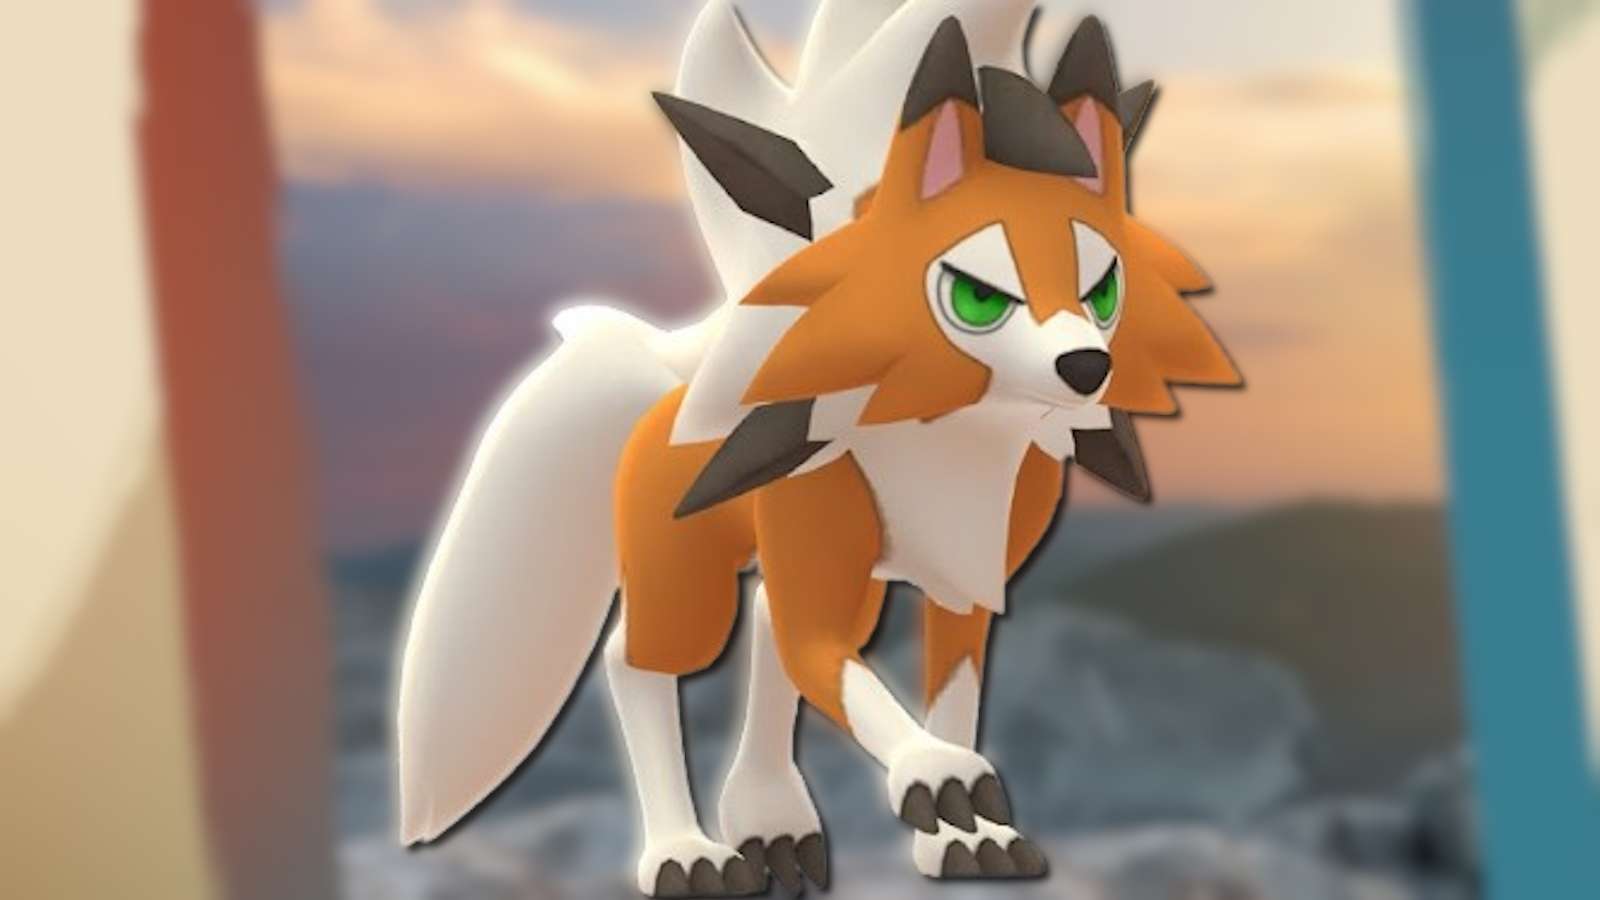 Dusk Form Lycanroc from Pokemon Go with blurred background.